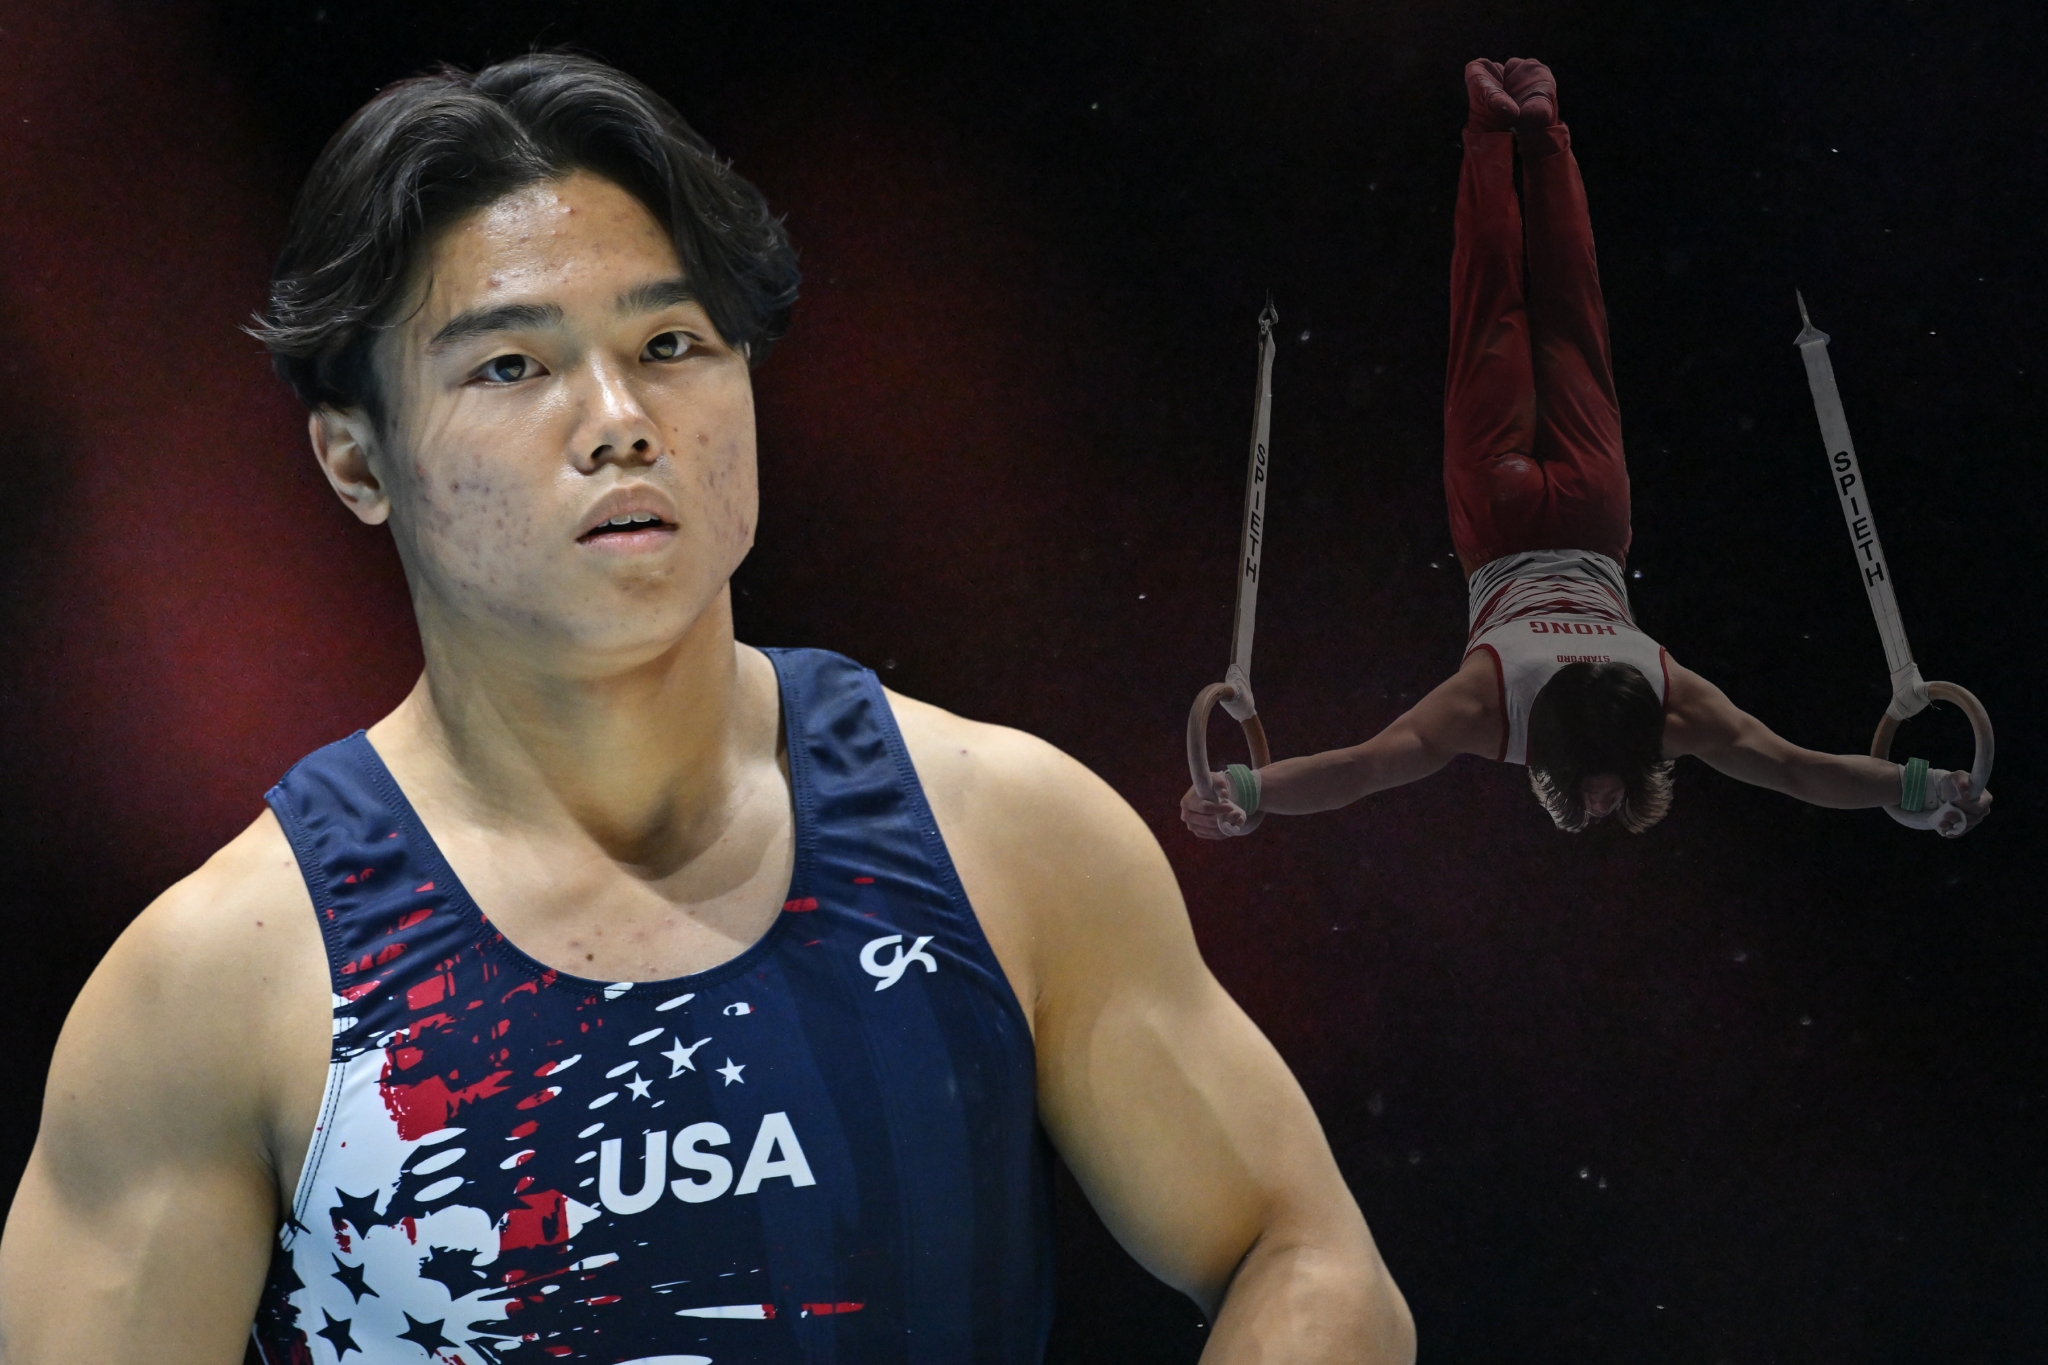 Asher Hong during the 2022 World Gymnastics Championships men's all-around final (left) and competing rings during the 2023 Winter Cup (right).